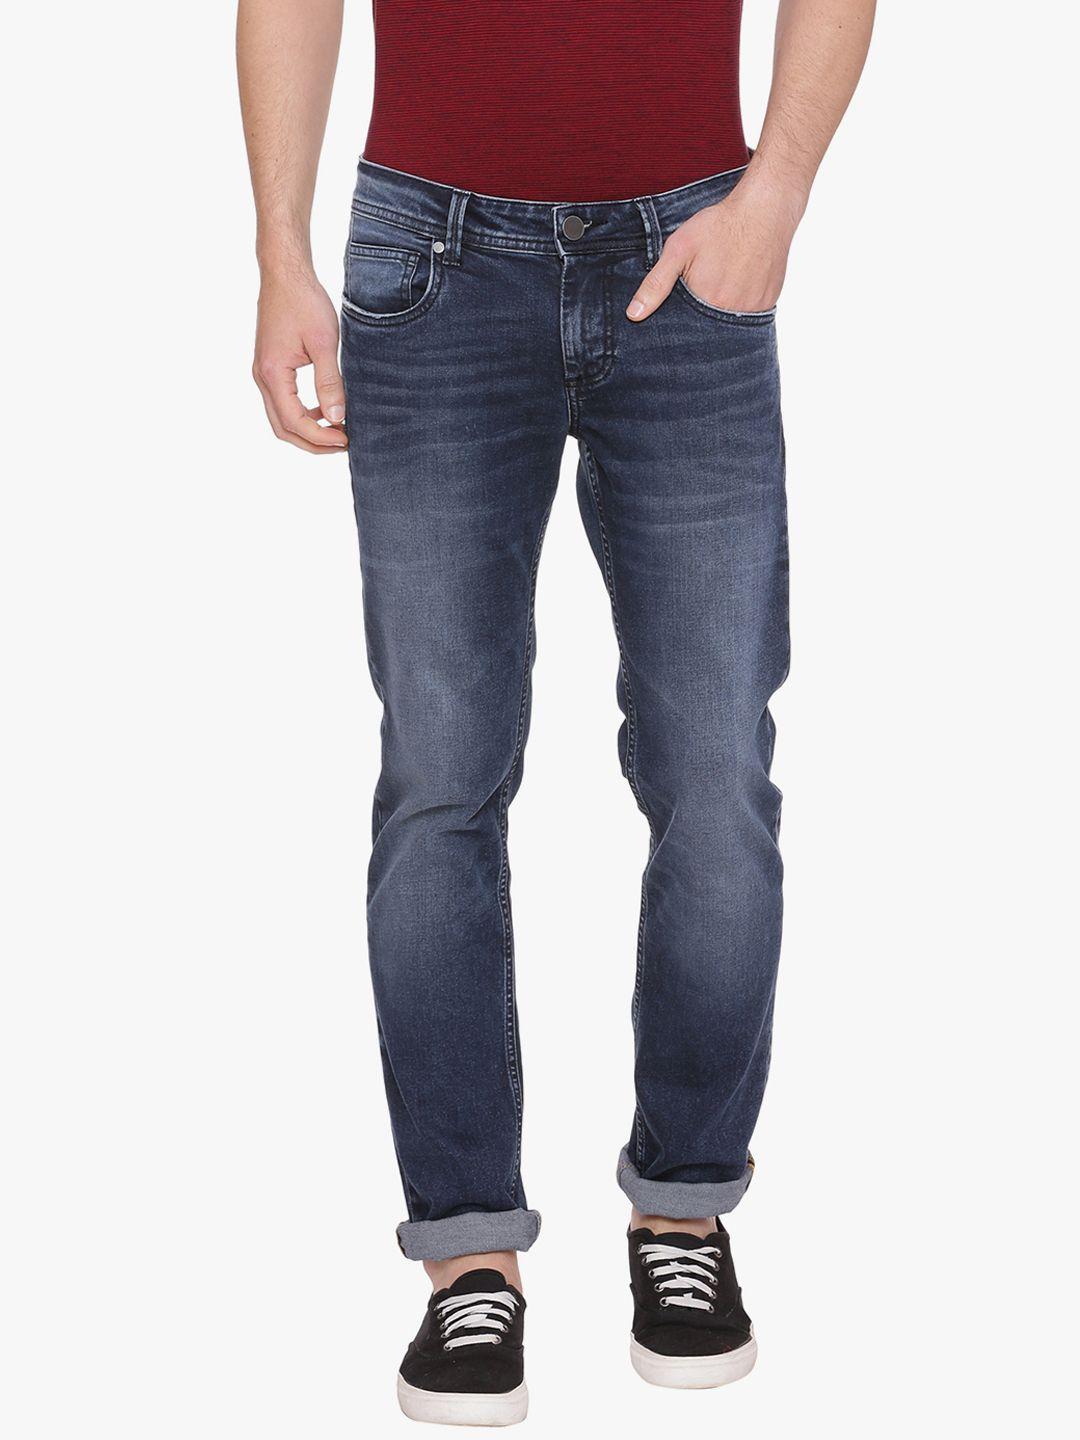 basics-men-navy-blue-skinny-fit-low-rise-clean-look-stretchable-jeans